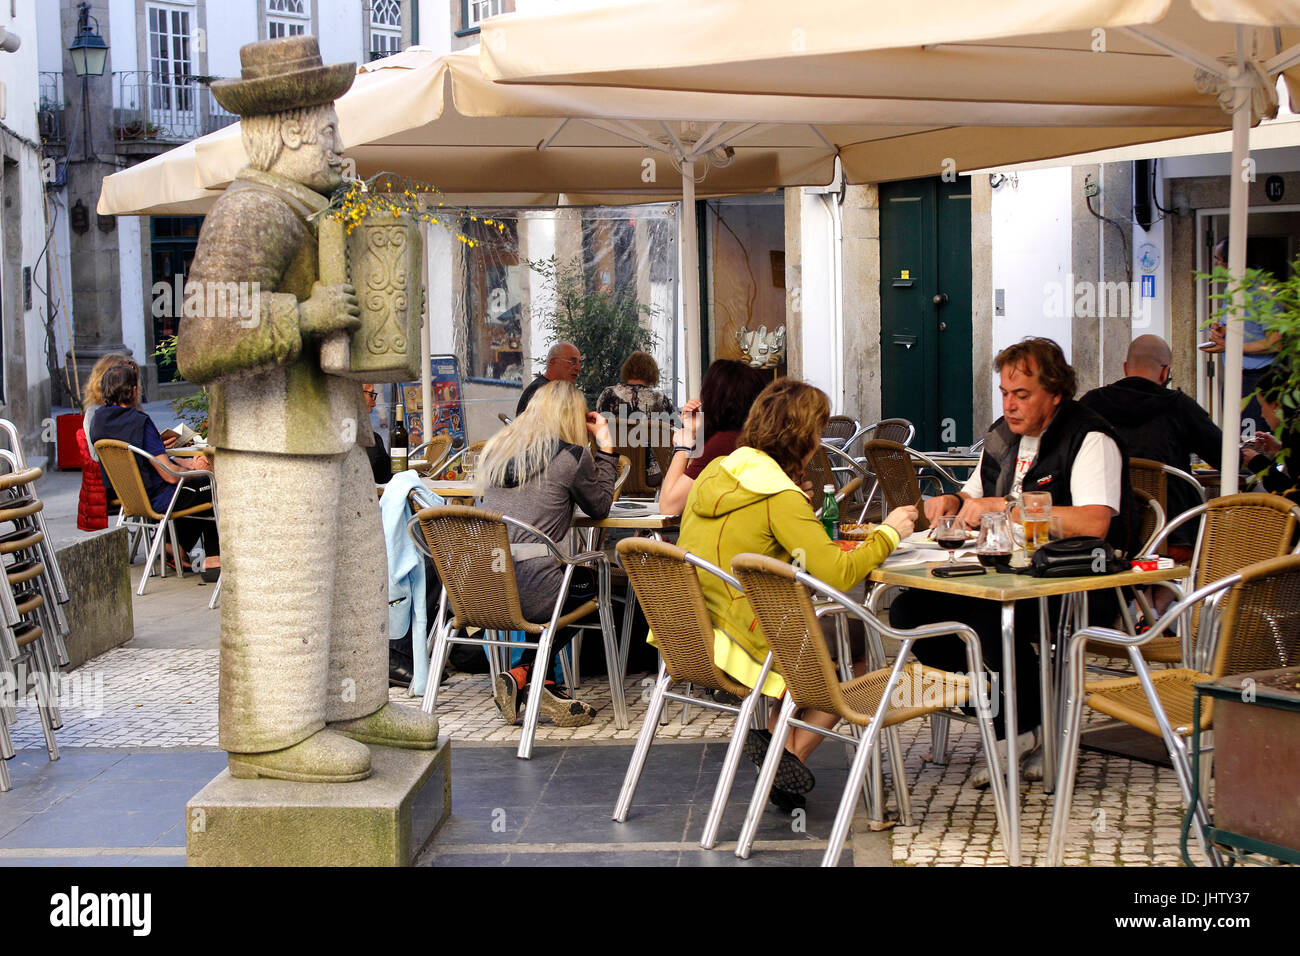 Statue tradition accordian player outside a small cafe Ponte de Lima Portugal Stock Photo